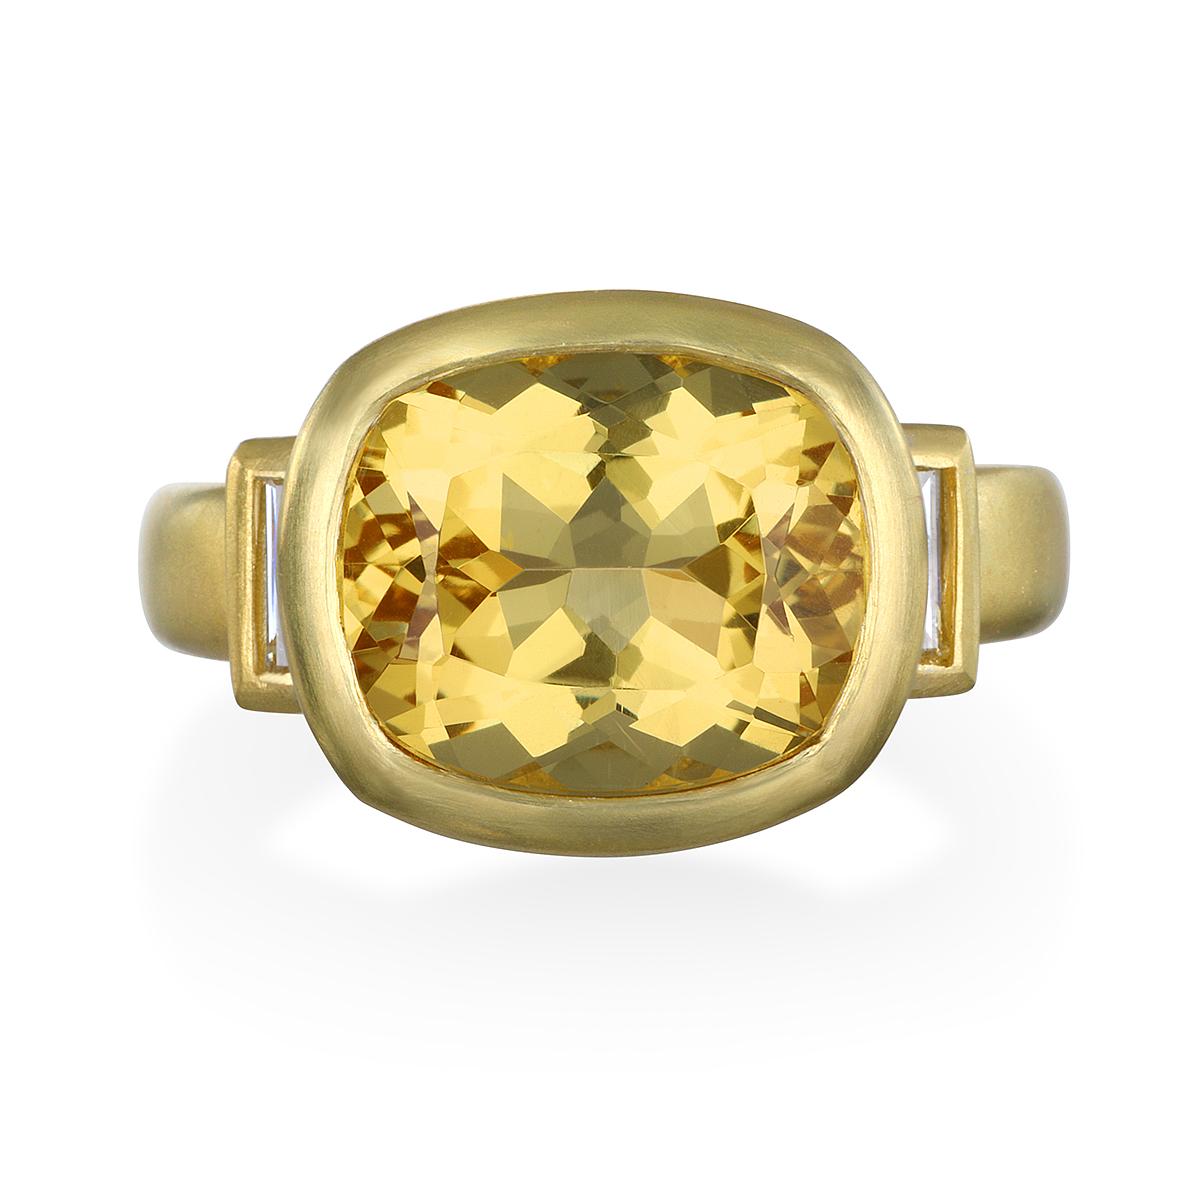  Although Beryl is best known for its famous gem varieties Emerald and Aquamarine, it comes in a variety of colors. Golden Beryl is yellow with a shade that is pure and bright. Beautifully set in 18k gold, accented with diamond baguettes, it's the